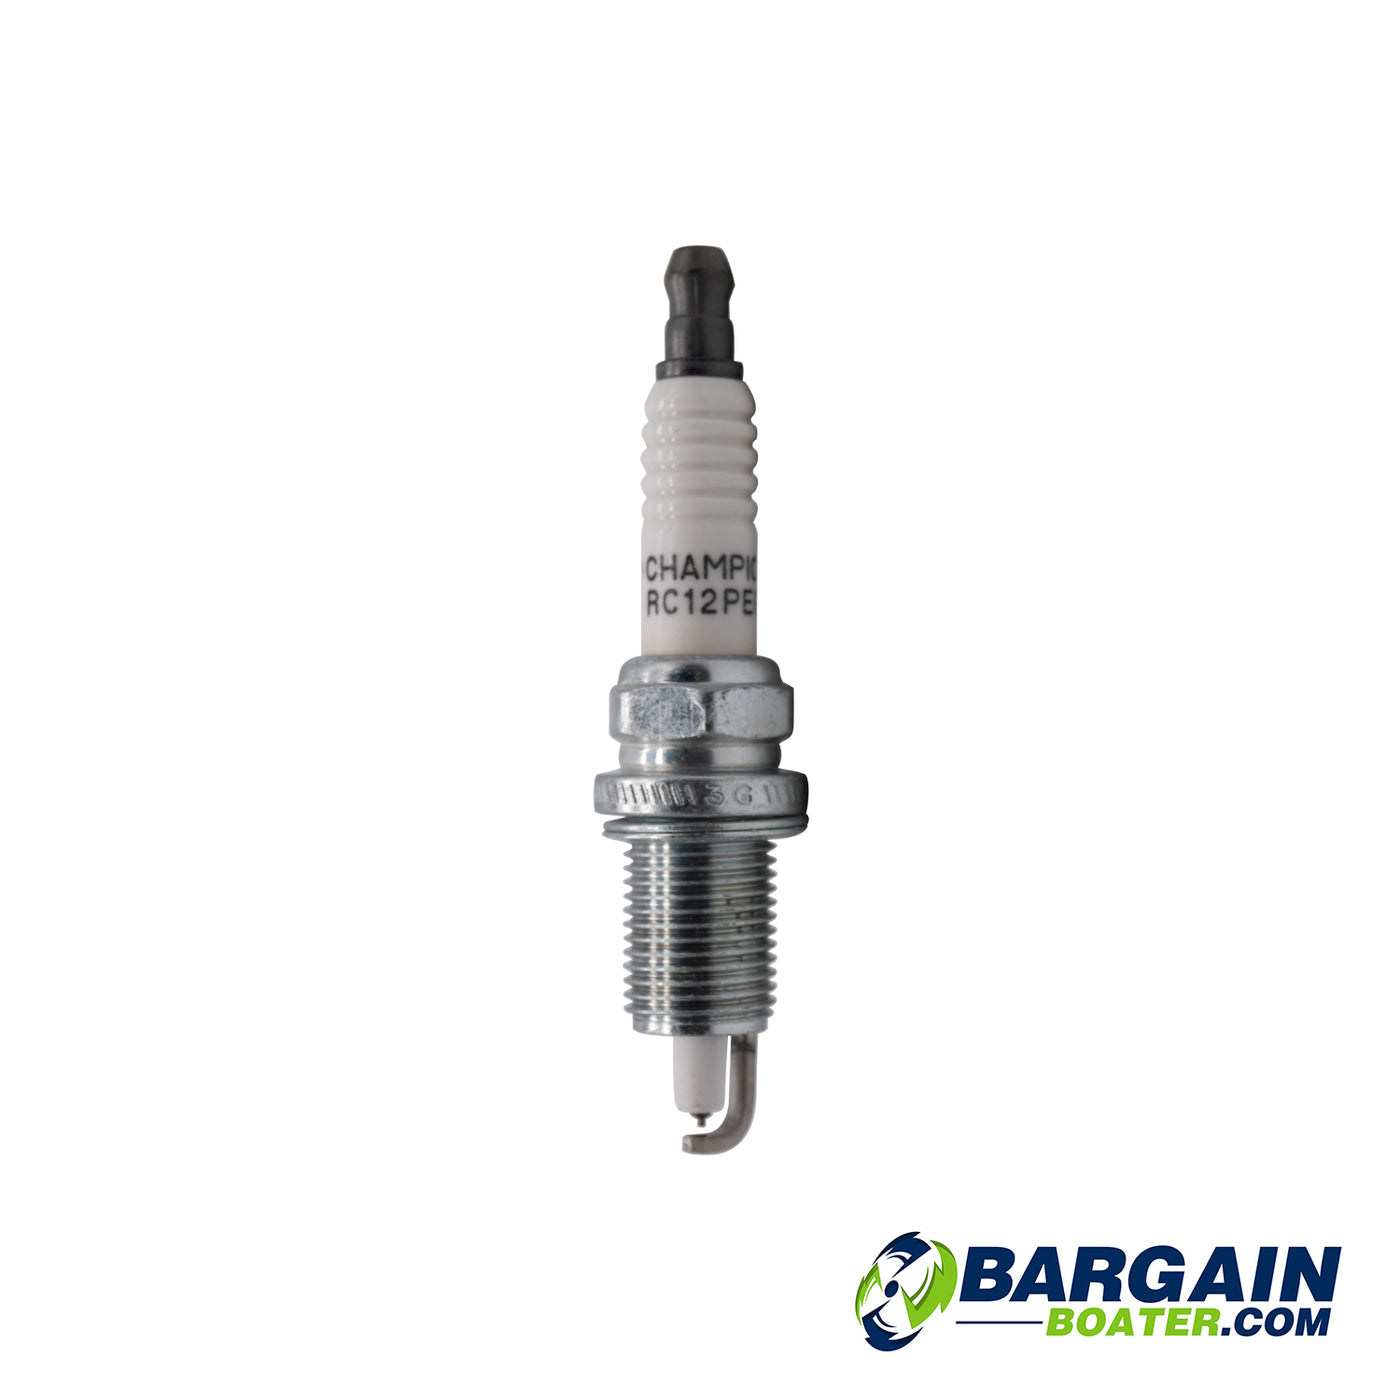 This is a Champion RC12PEPB Spark Plug for Evinrude/Johnson 2-Stroke outboard motors (5005583).